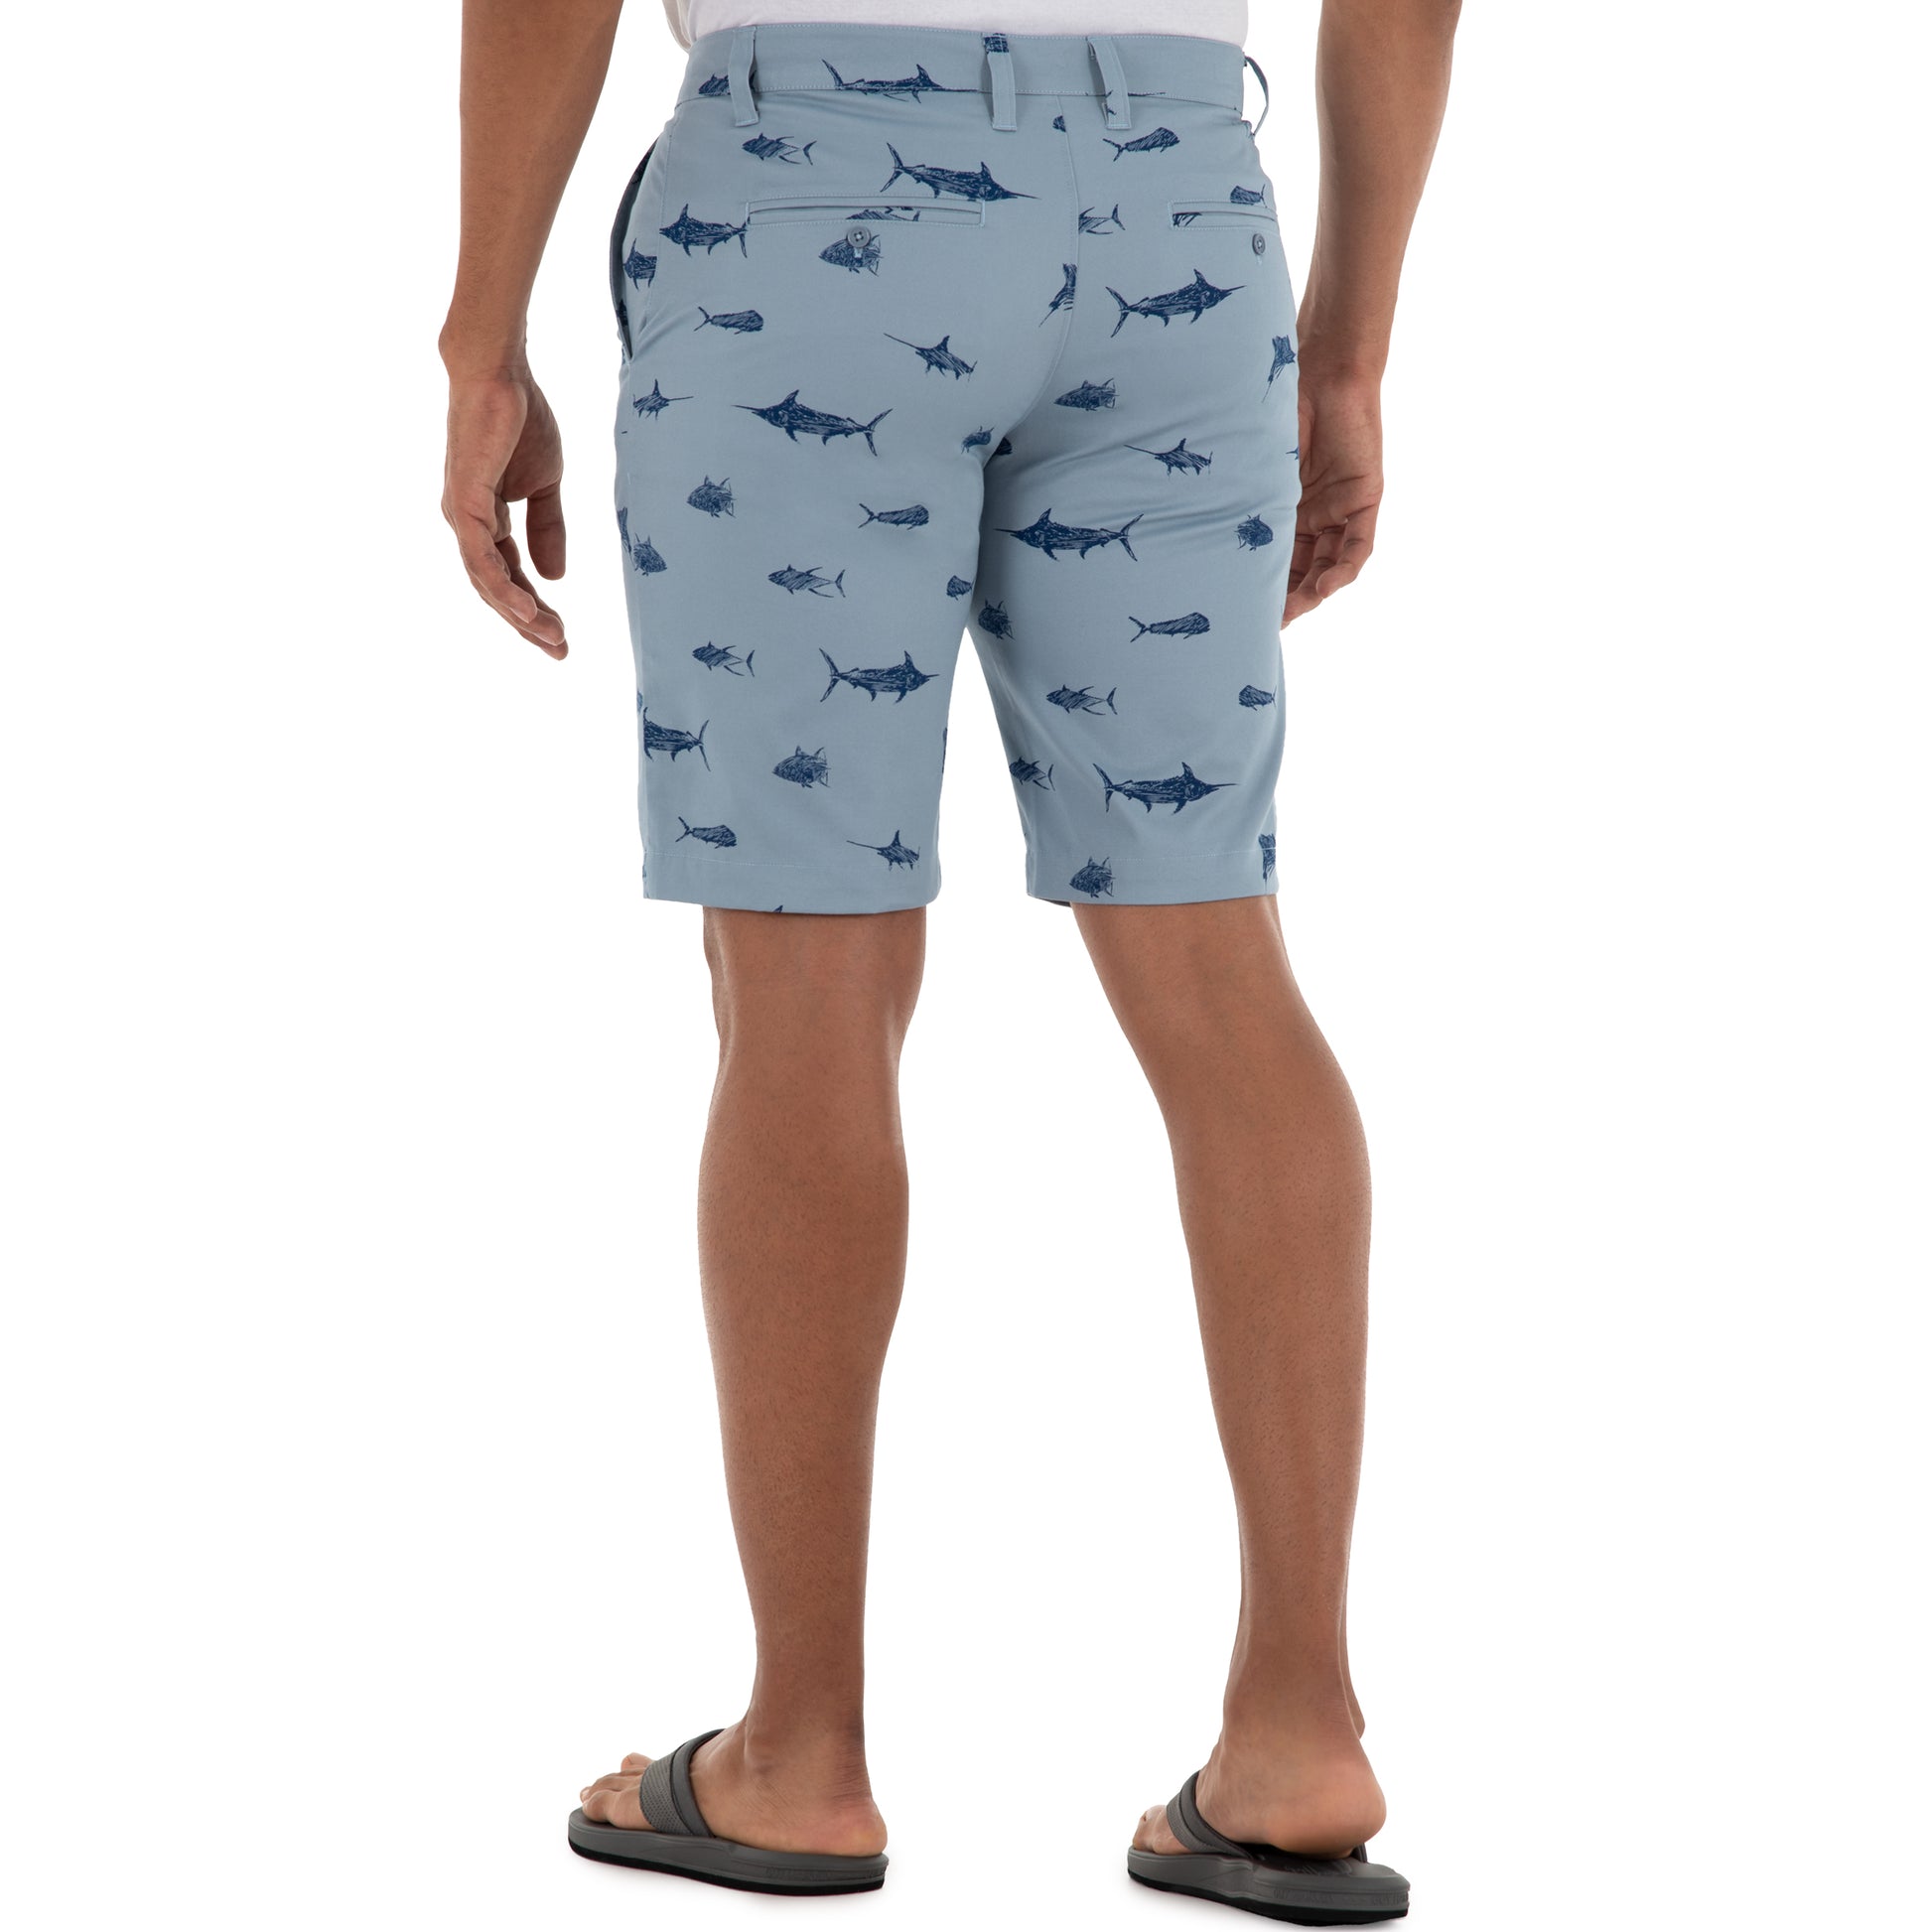 Men's 9" Performance Printed Blue Woven Short View 4